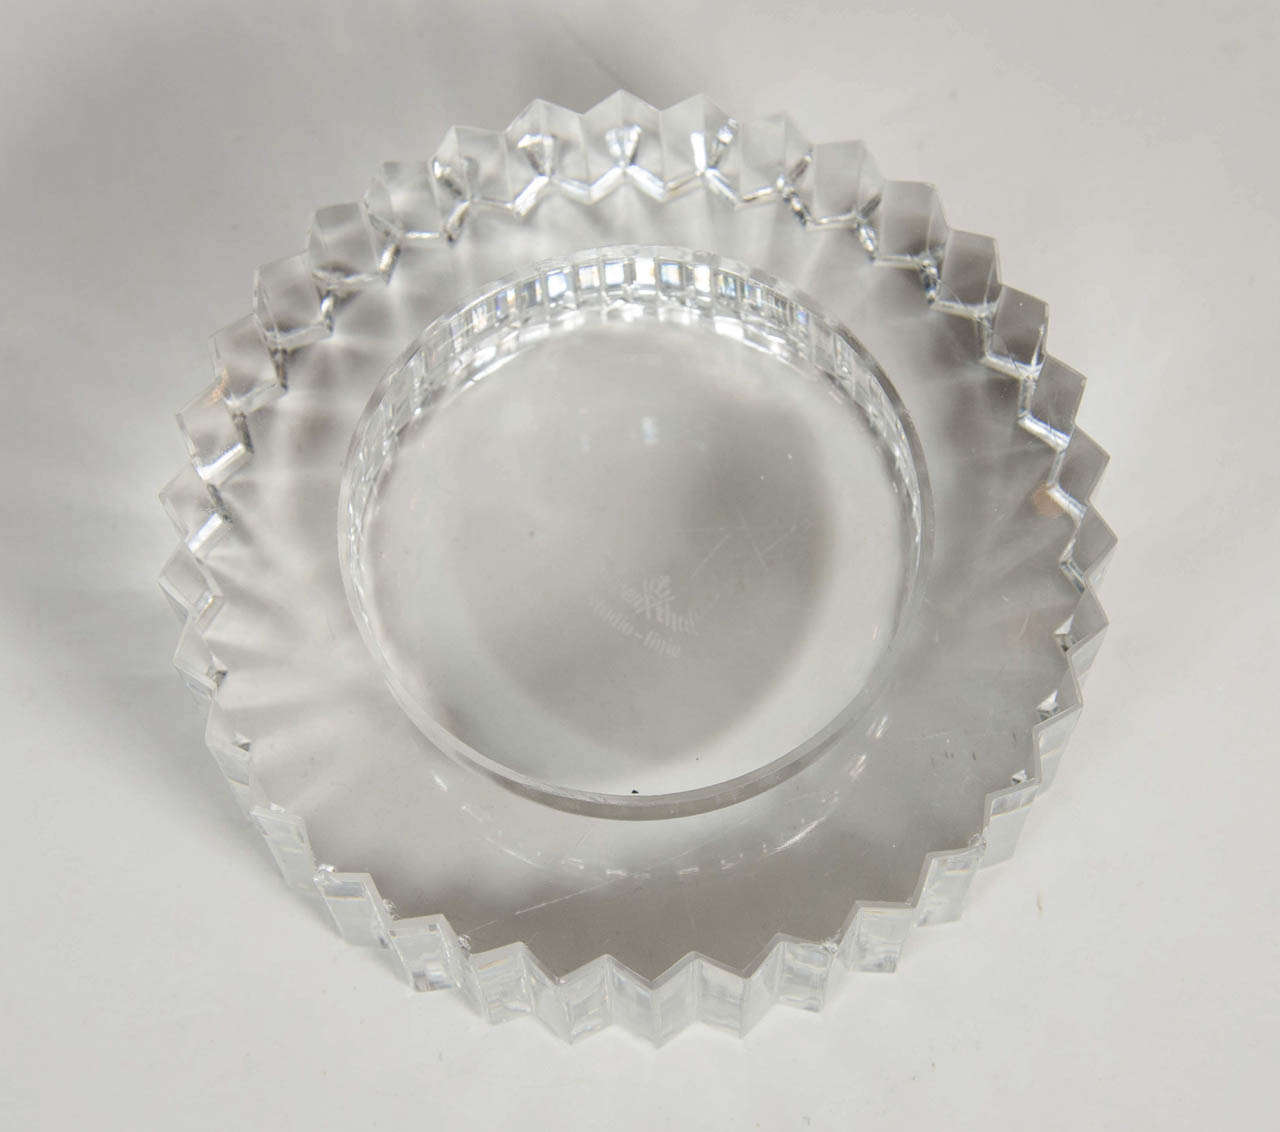 This cut crystal tray has a great modernist gear design and is signed Rosenthal on the bottom. This would be great as a ring /jewelry holder or just as a chic decorative object.